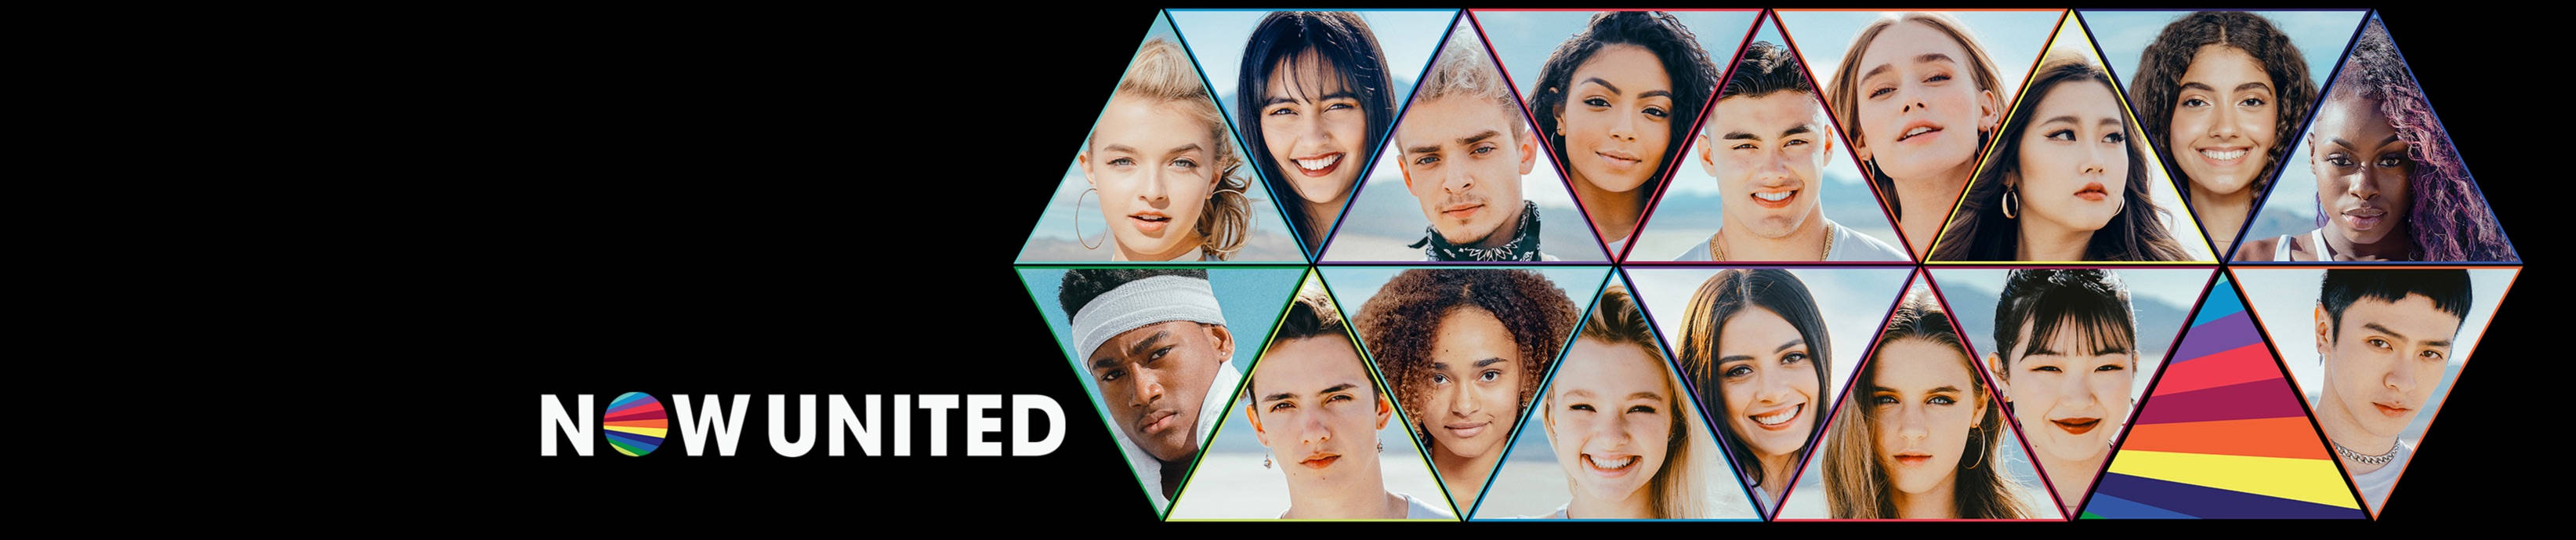 Now United Members Banner